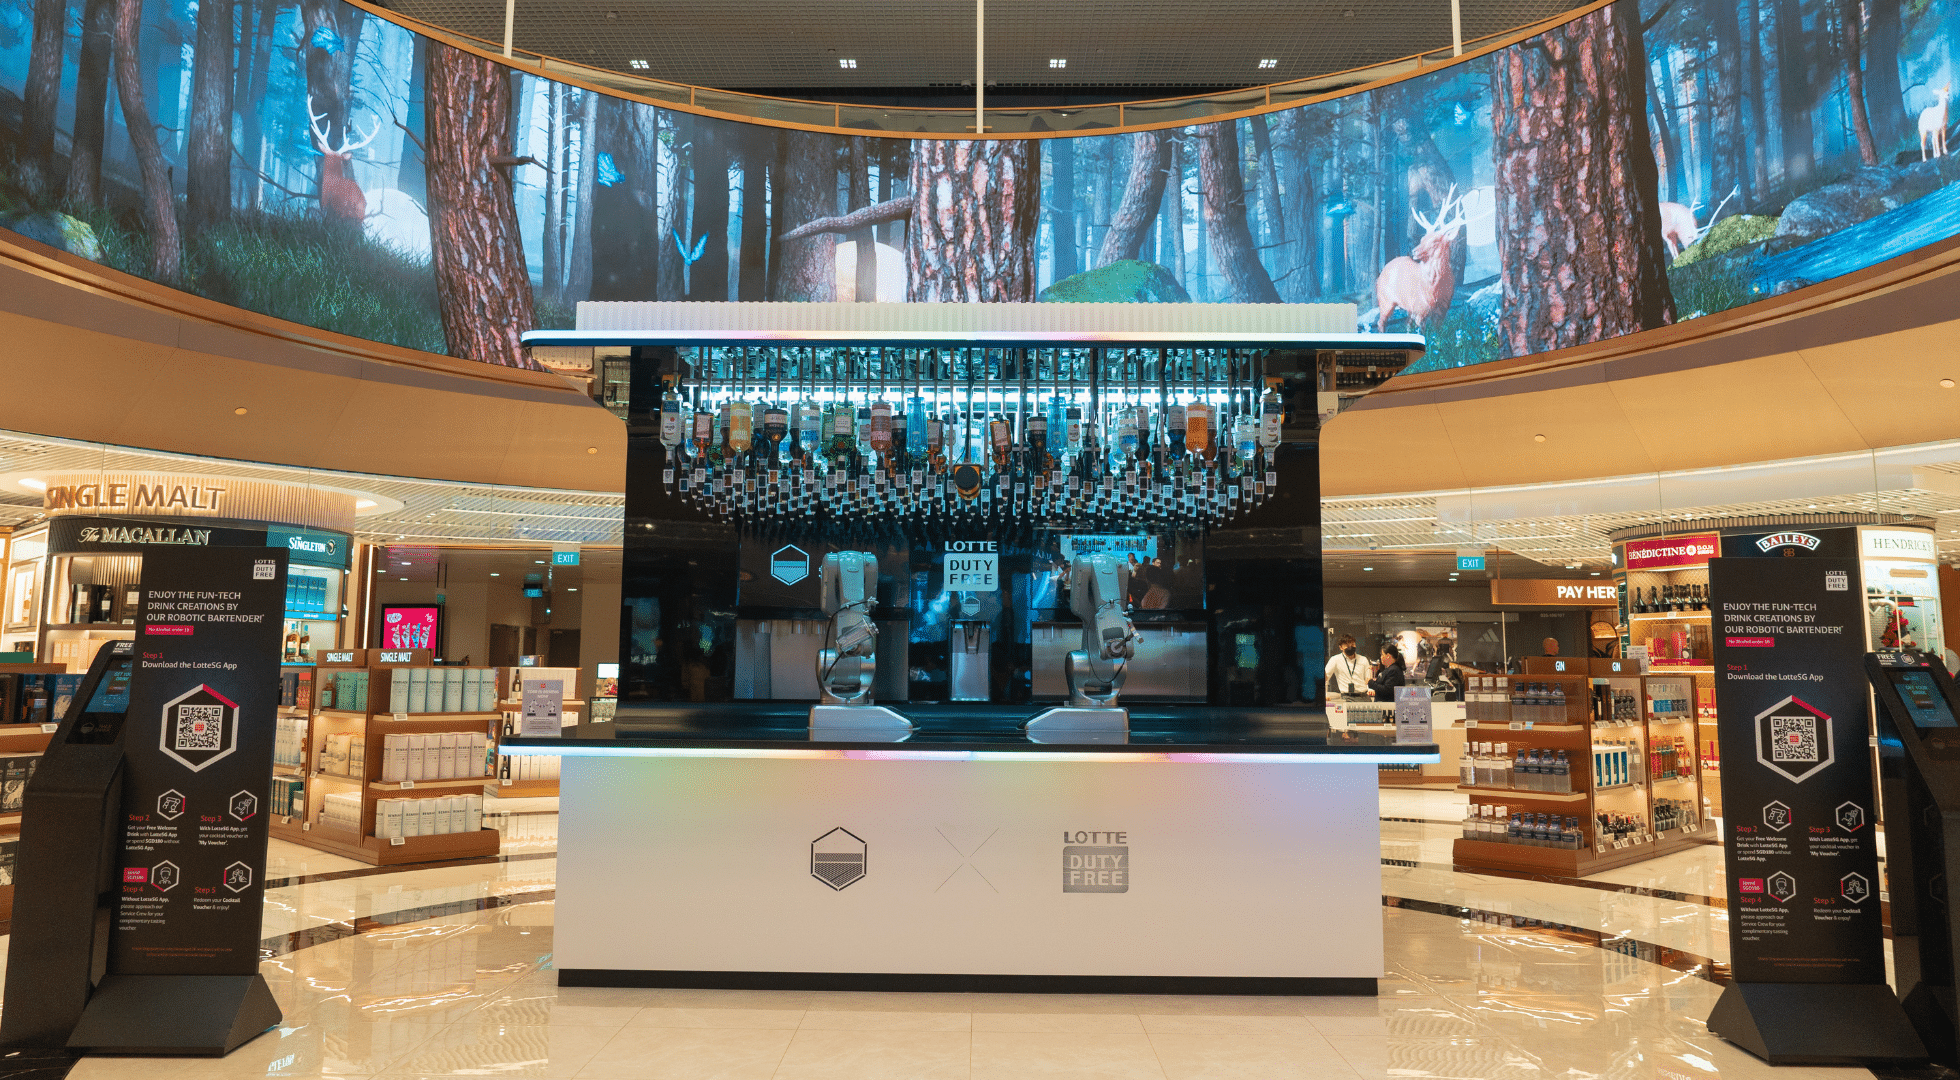 Enjoy a visual feast of Li Bai’s moonlit reverie while waiting for Toni’s mechanical artistry to serve up some cocktails. Credit: Changi Airport